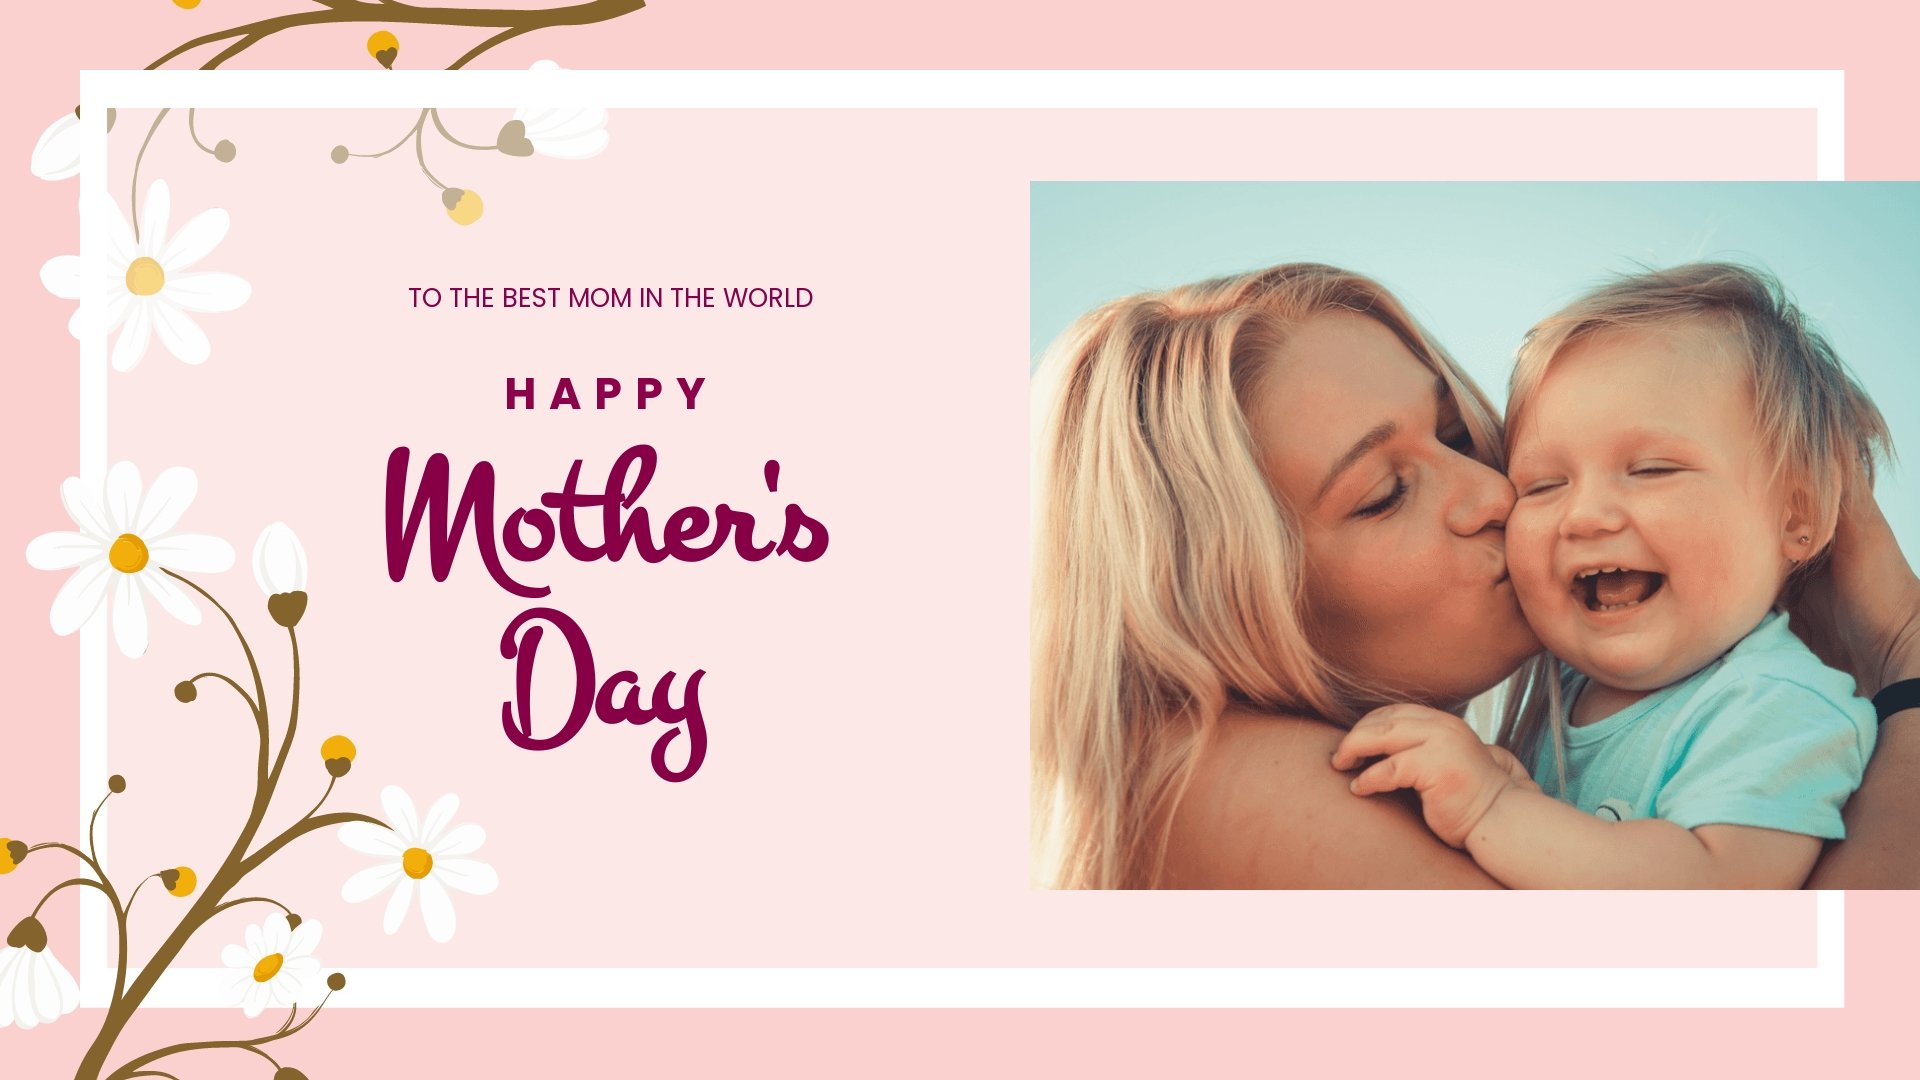 Mother's Day Greeting Image Template